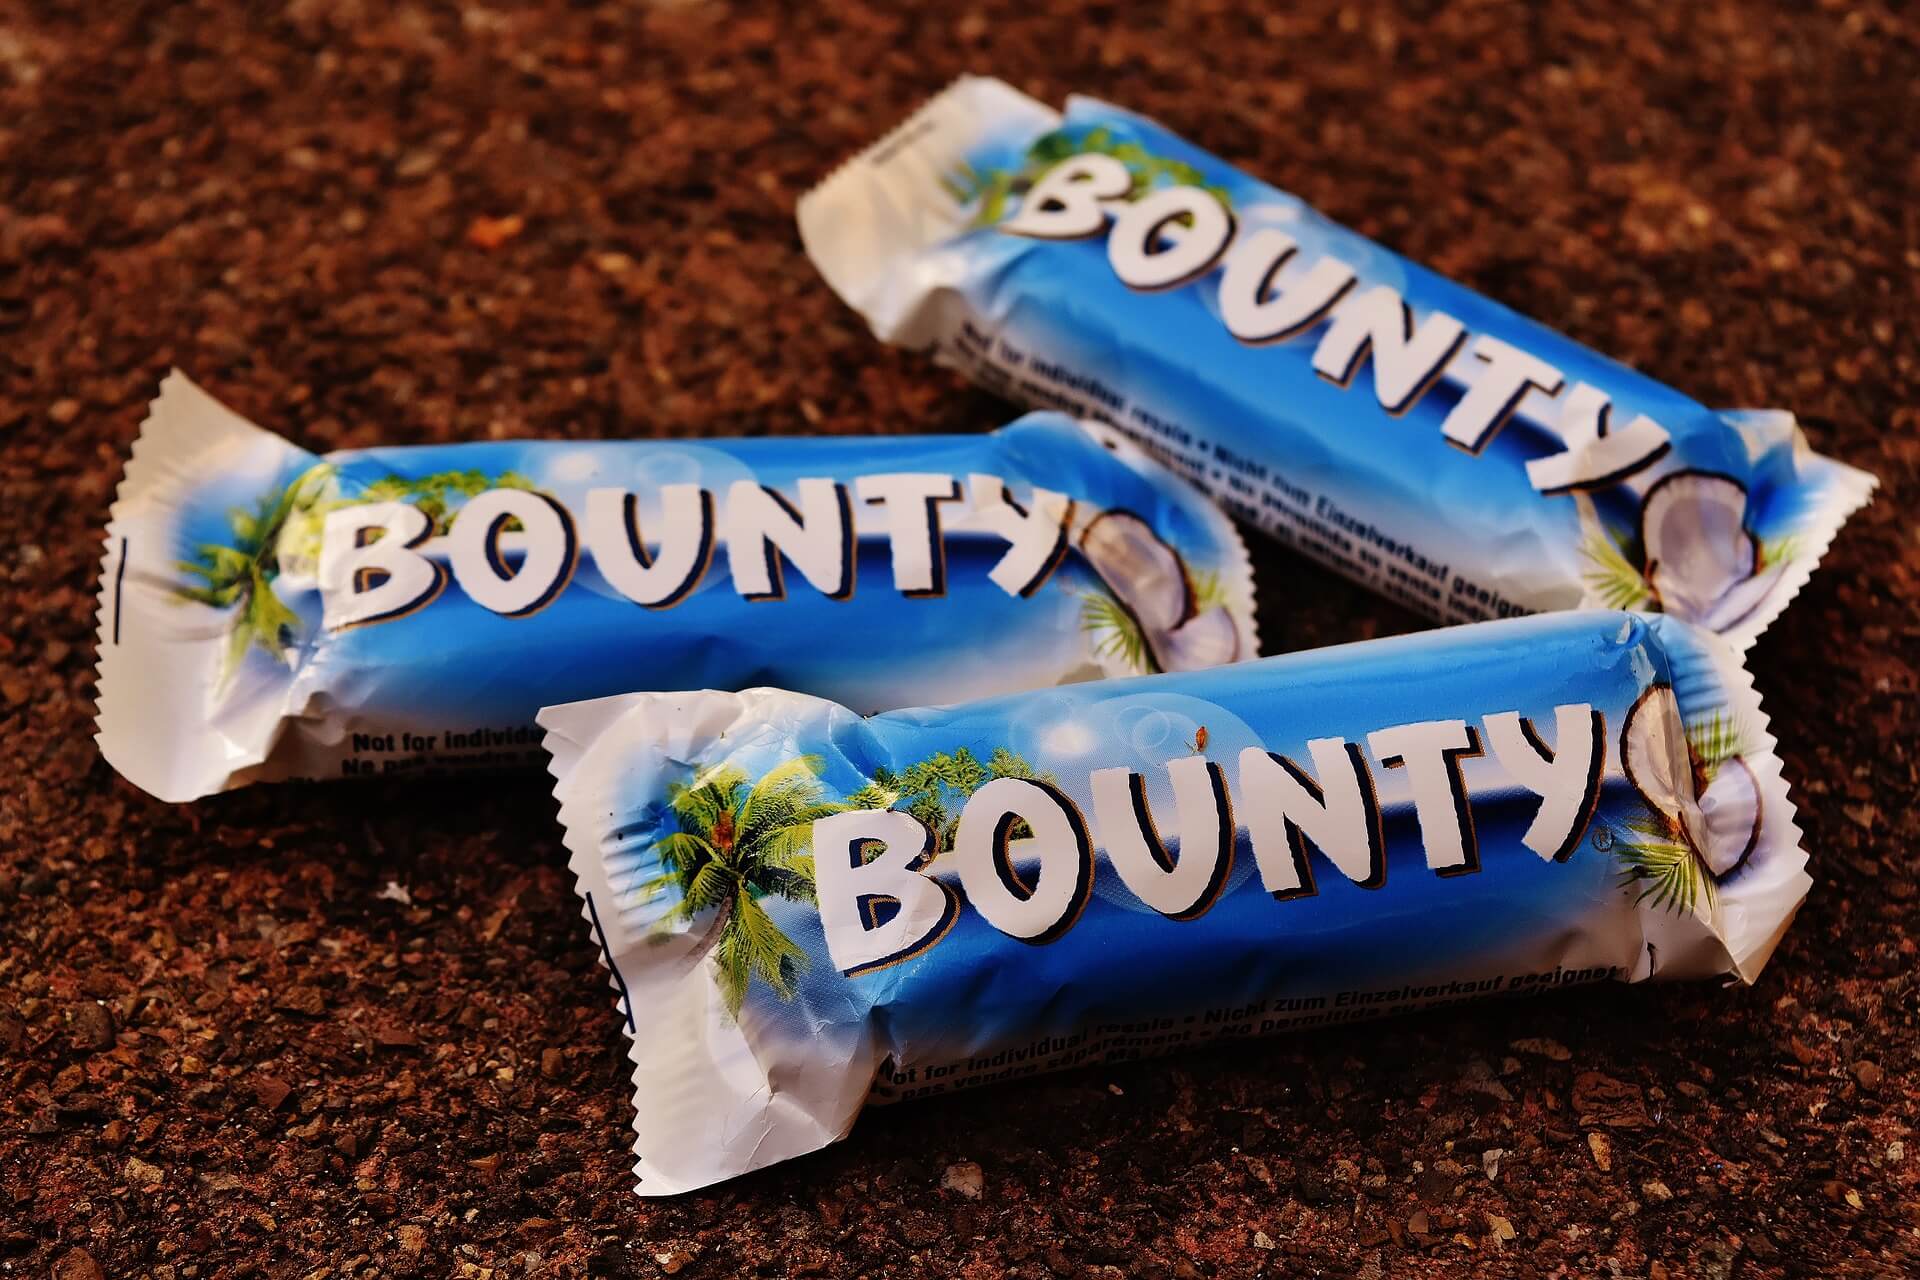 Are Bounty bars really that BAD?! – Fight the Fads